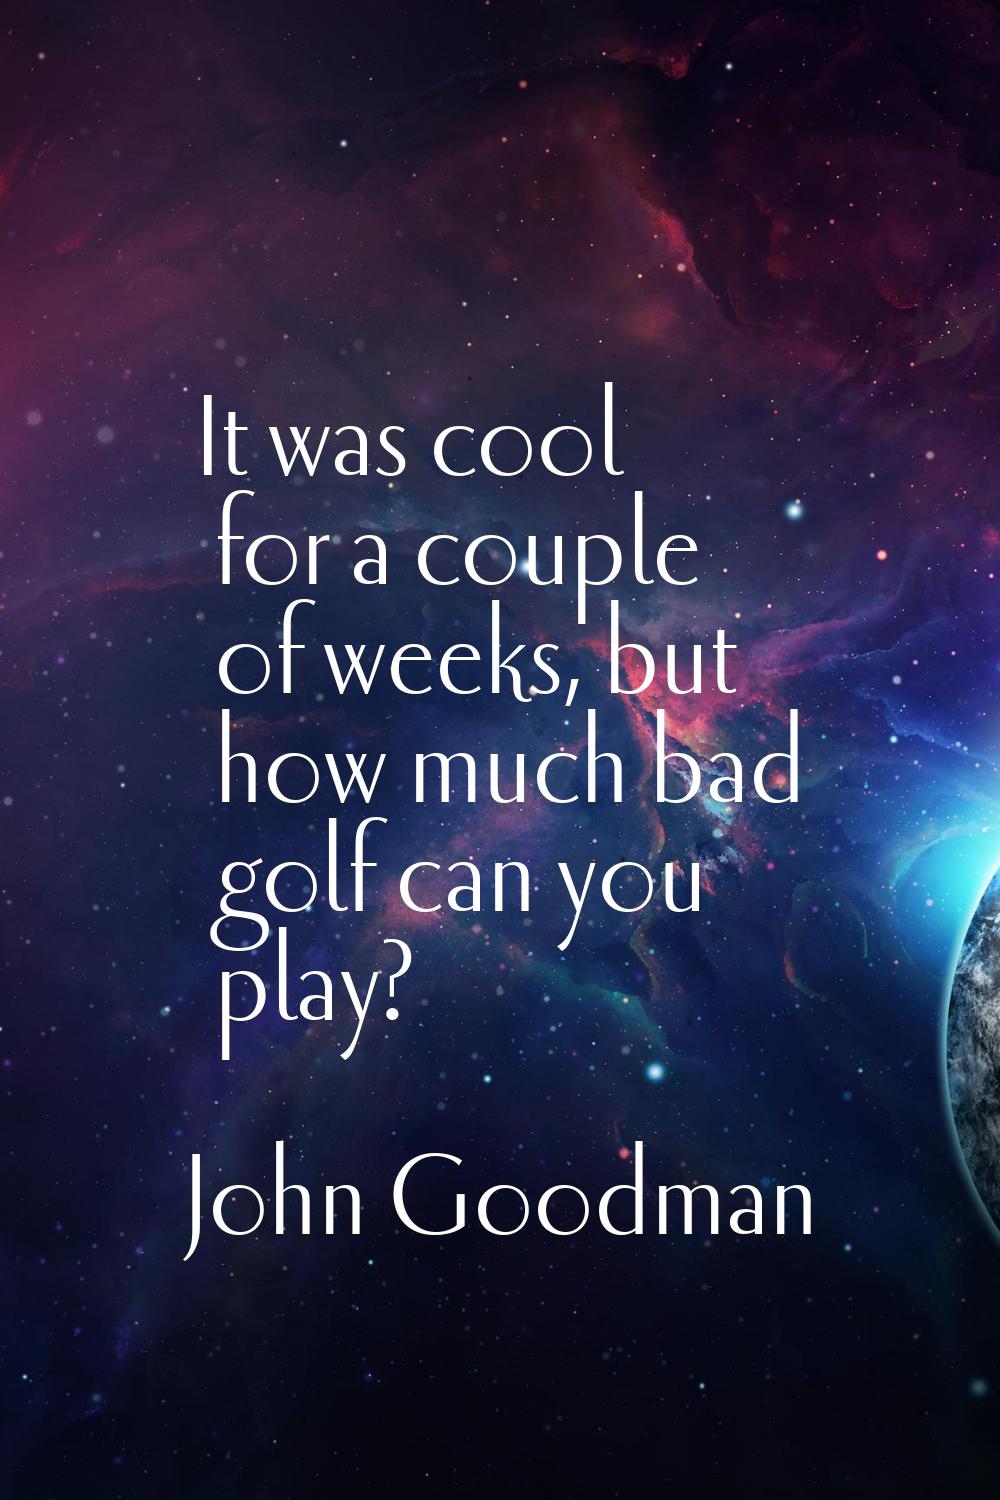 It was cool for a couple of weeks, but how much bad golf can you play?